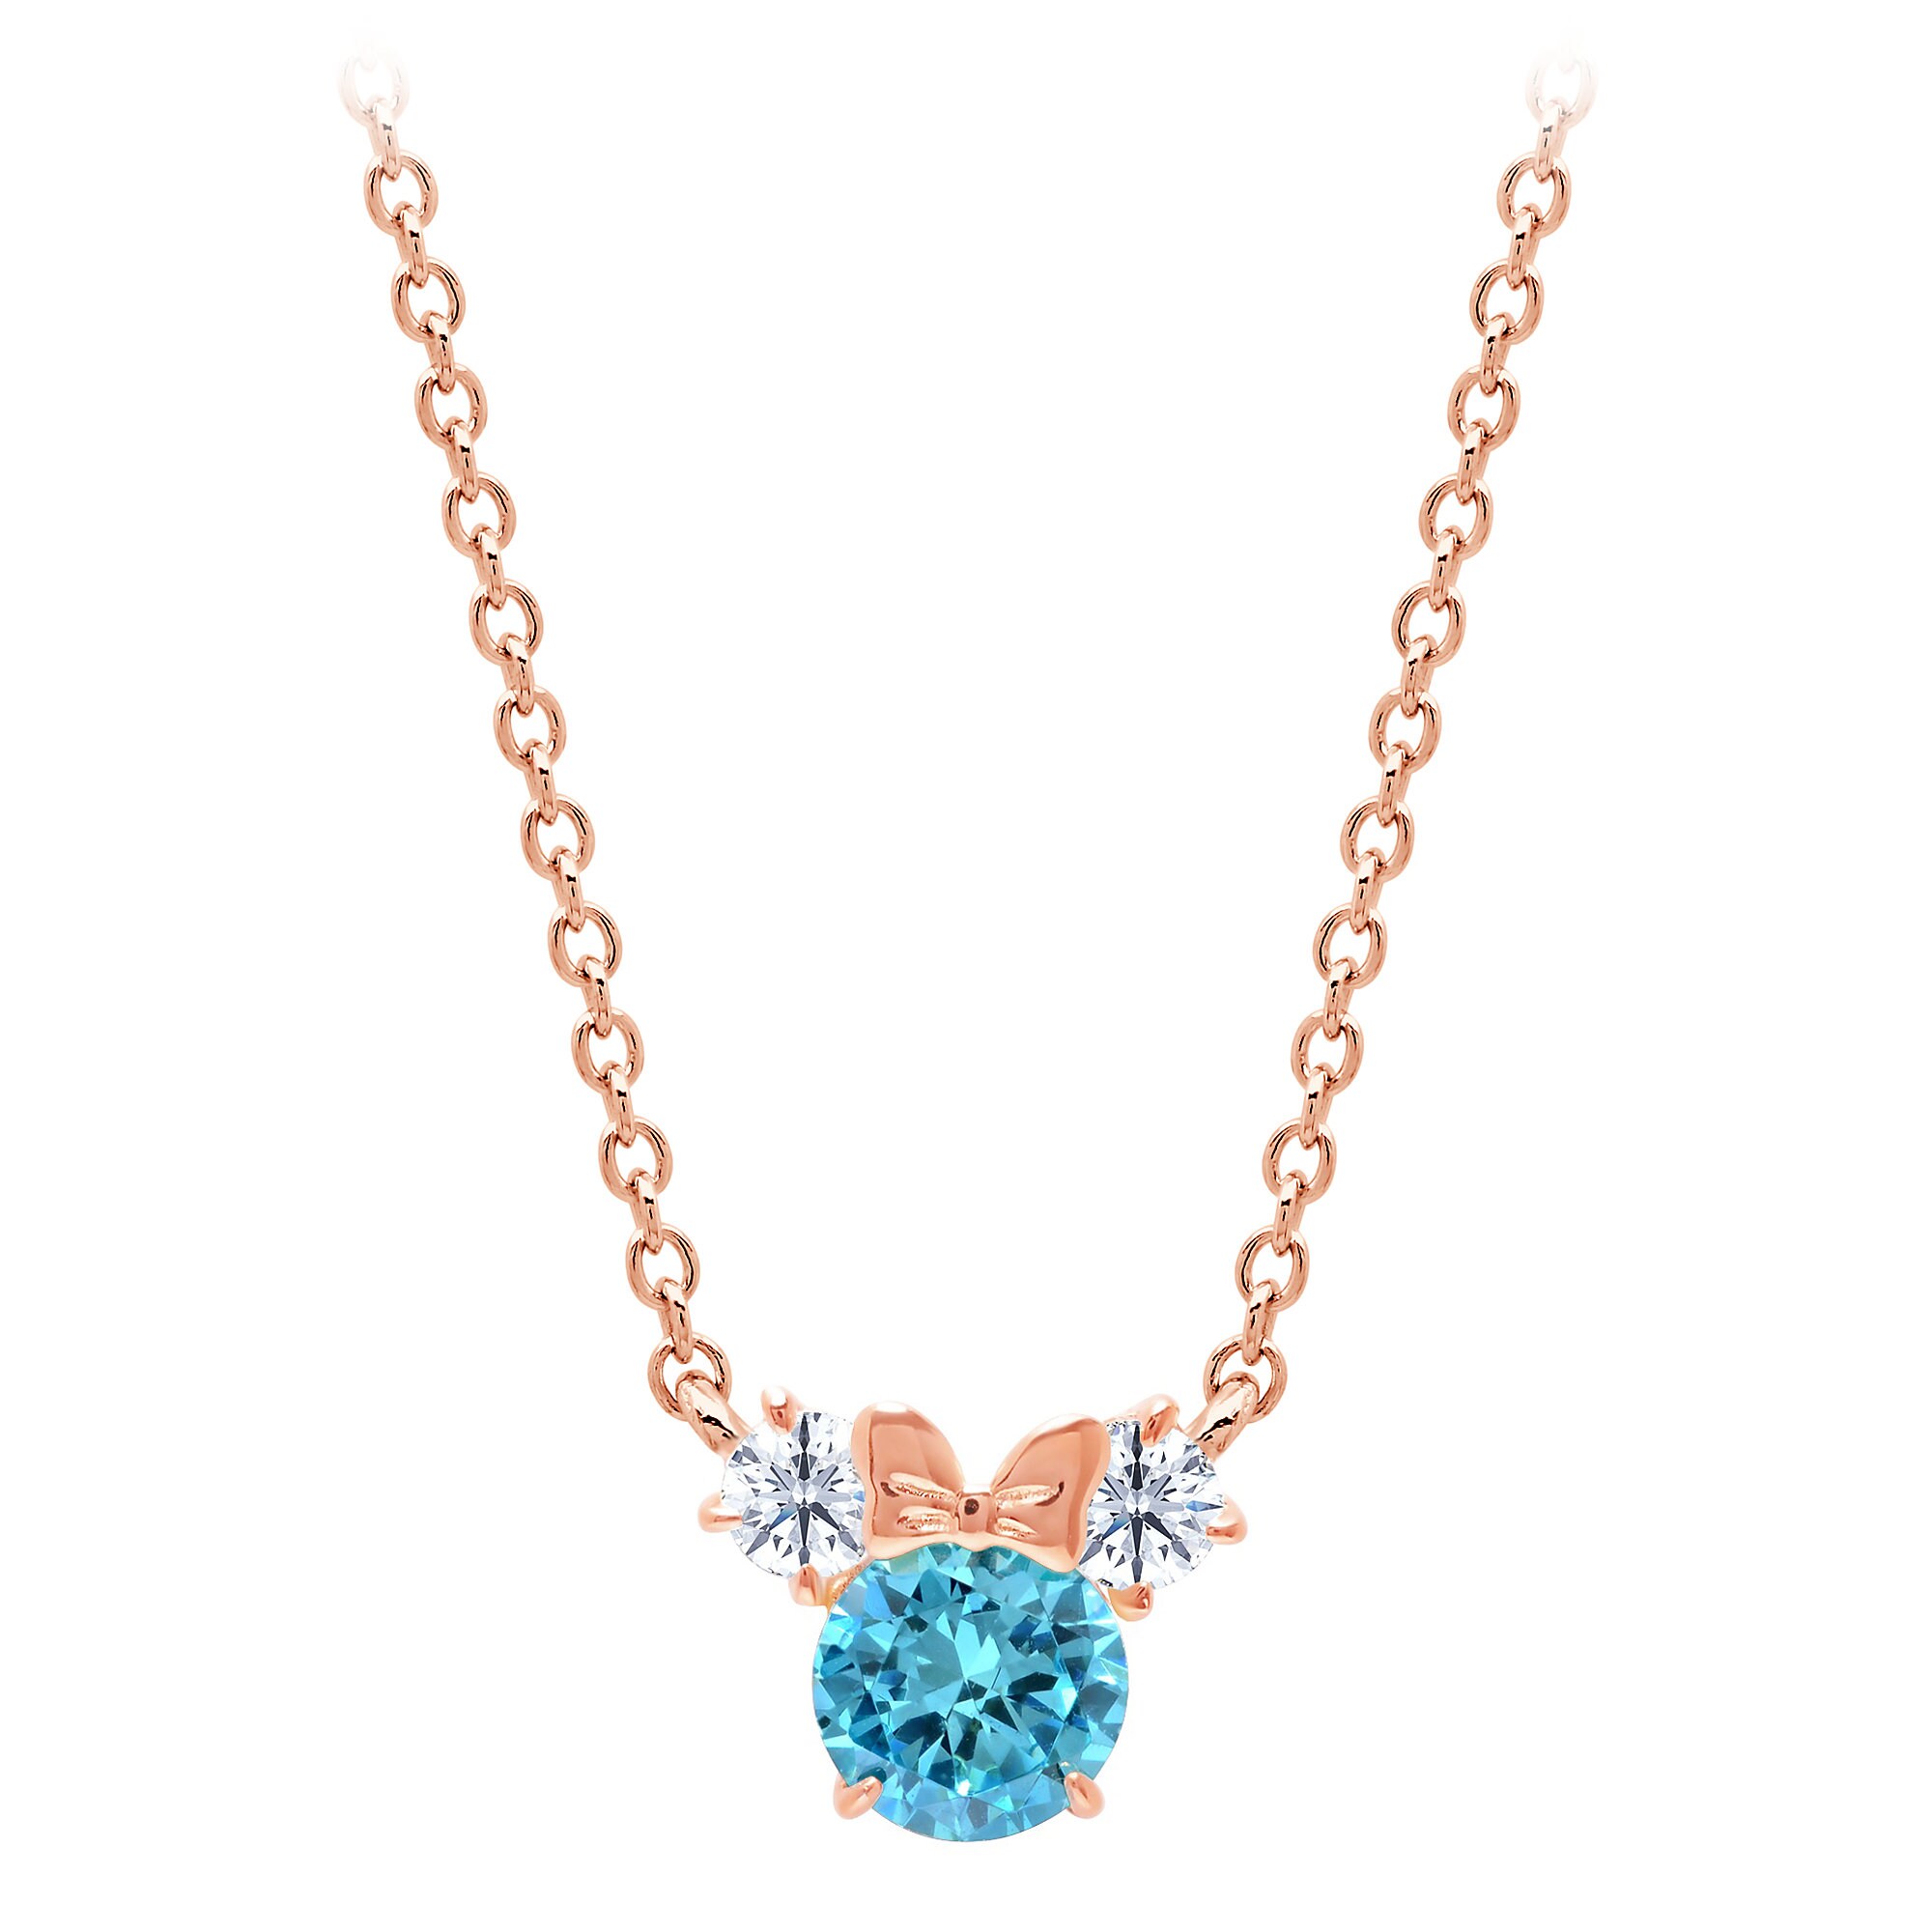 Minnie Mouse Birthstone Necklace for Kids by CRISLU - Rose Gold